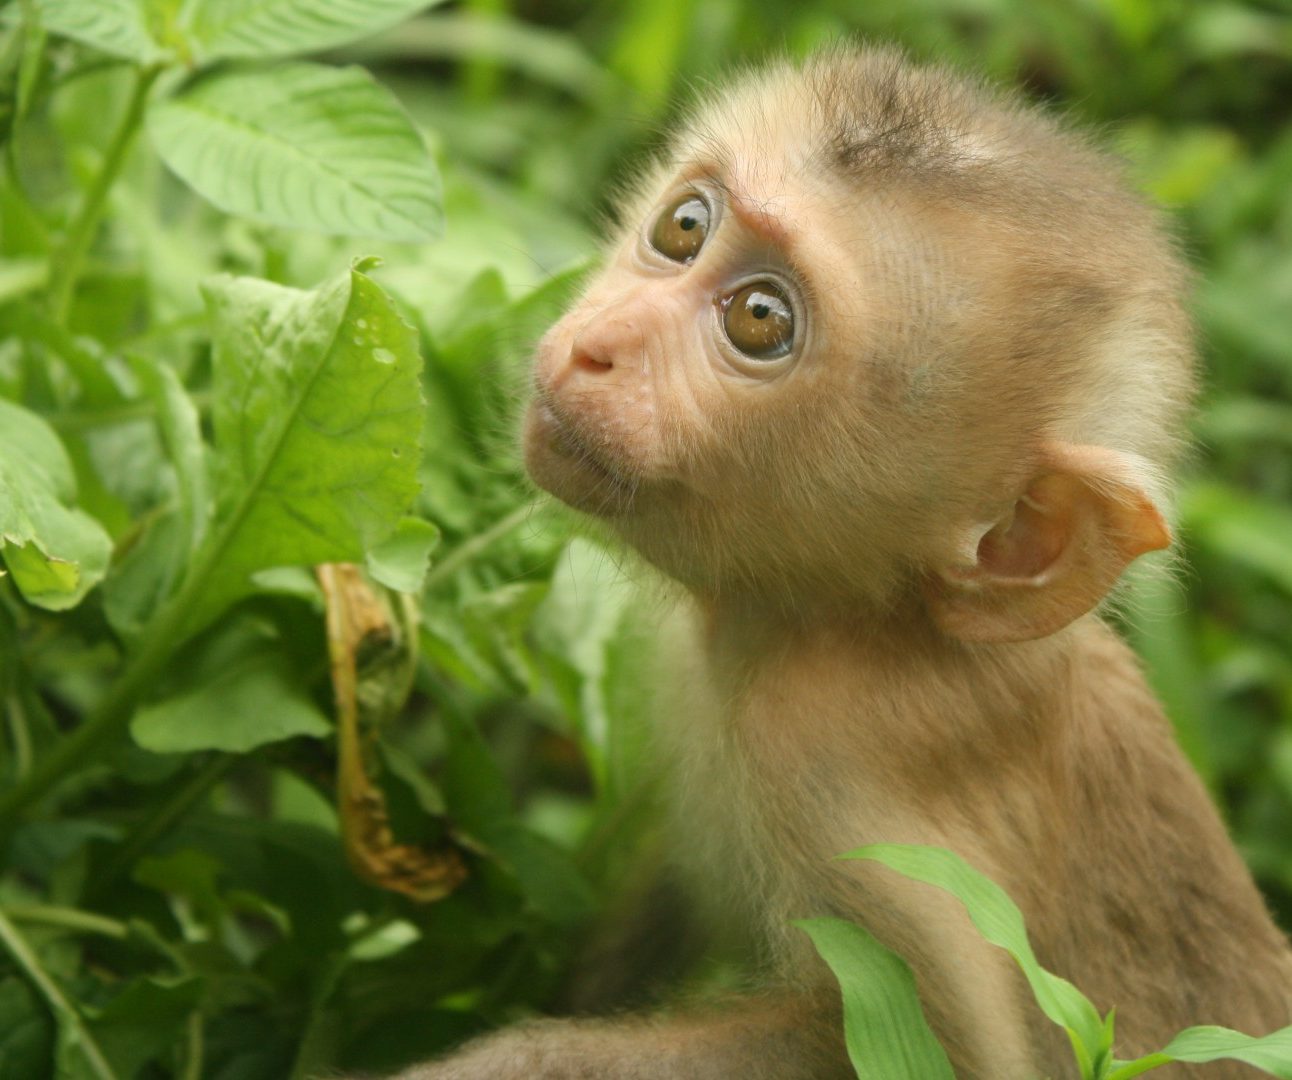 A baby macaque monkey sitting on the forest floor amongst leaves and bushes, lookjng up at the camera